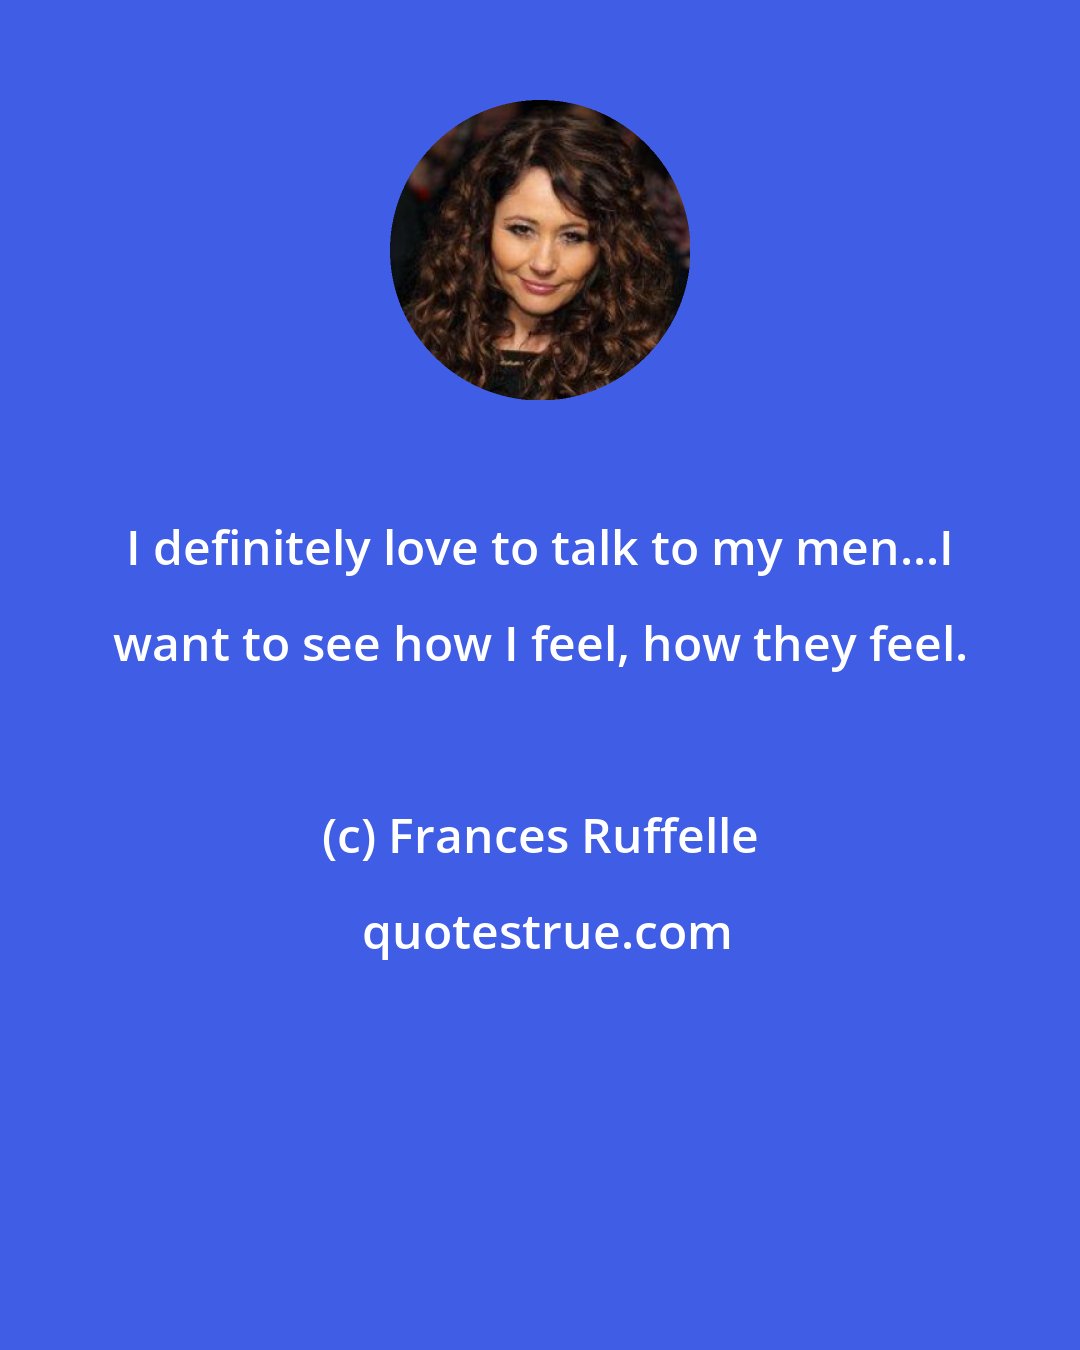 Frances Ruffelle: I definitely love to talk to my men...I want to see how I feel, how they feel.